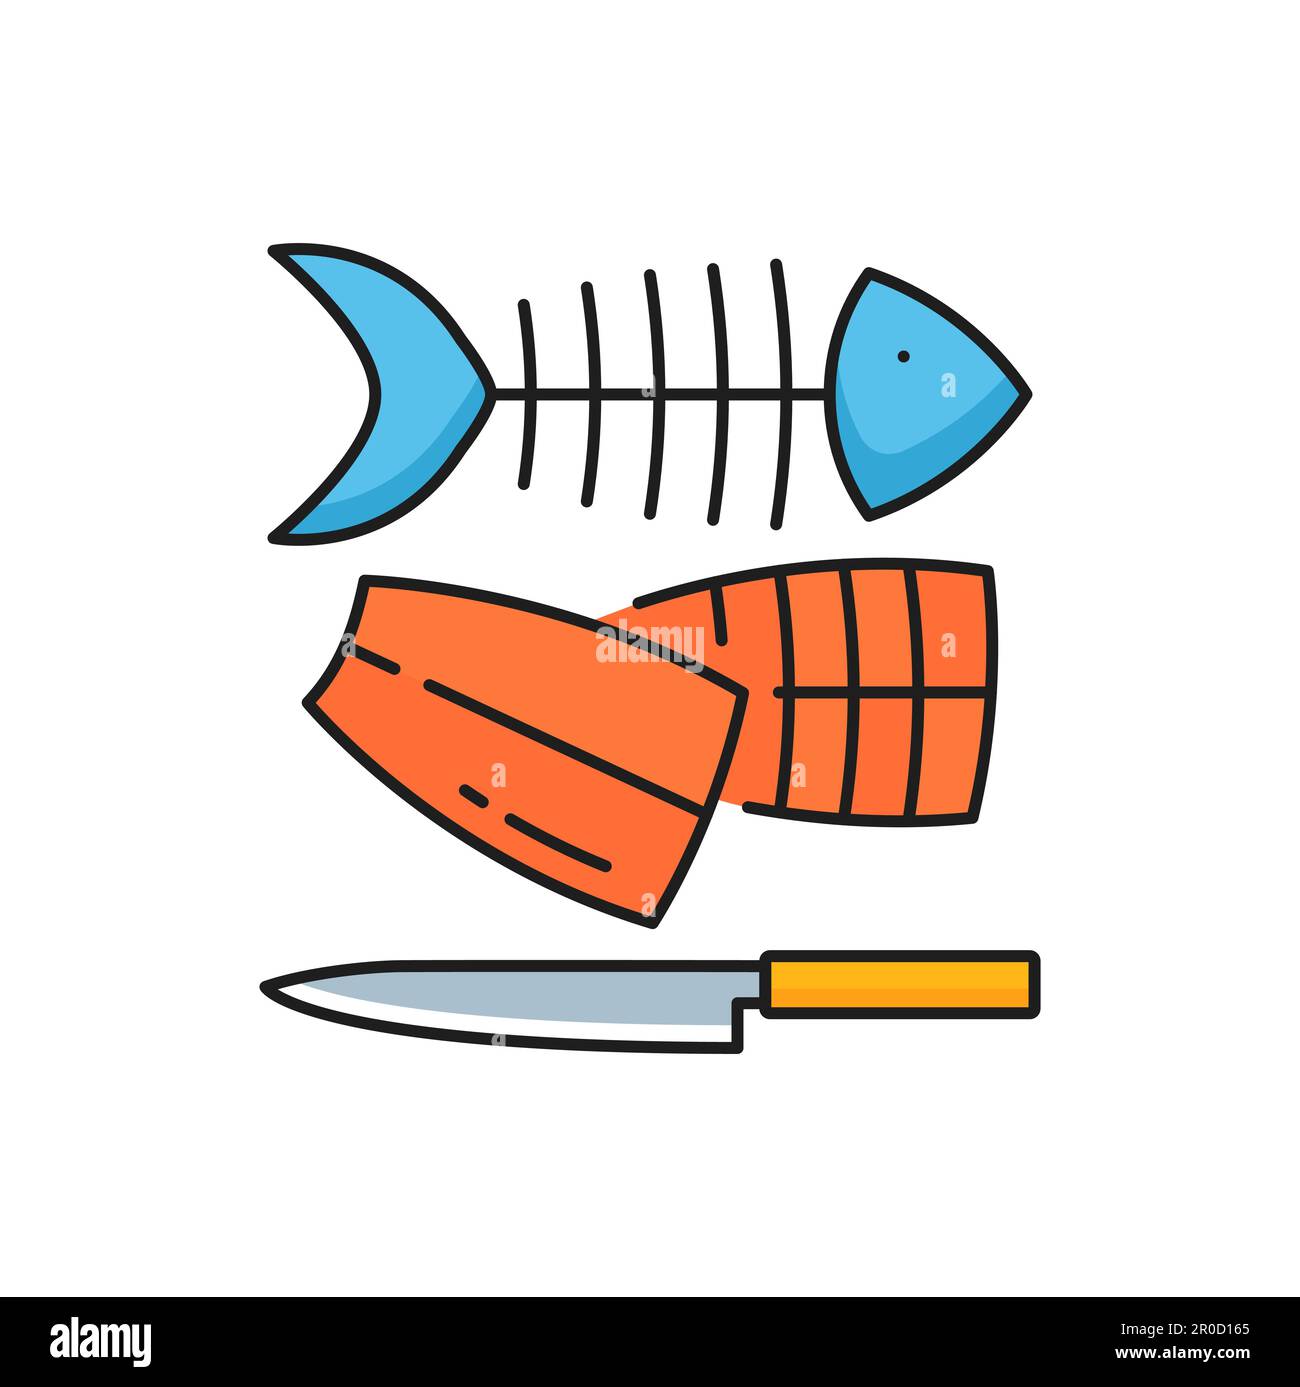 Fishing industry fish fillet processing line icon. Salmon, trout